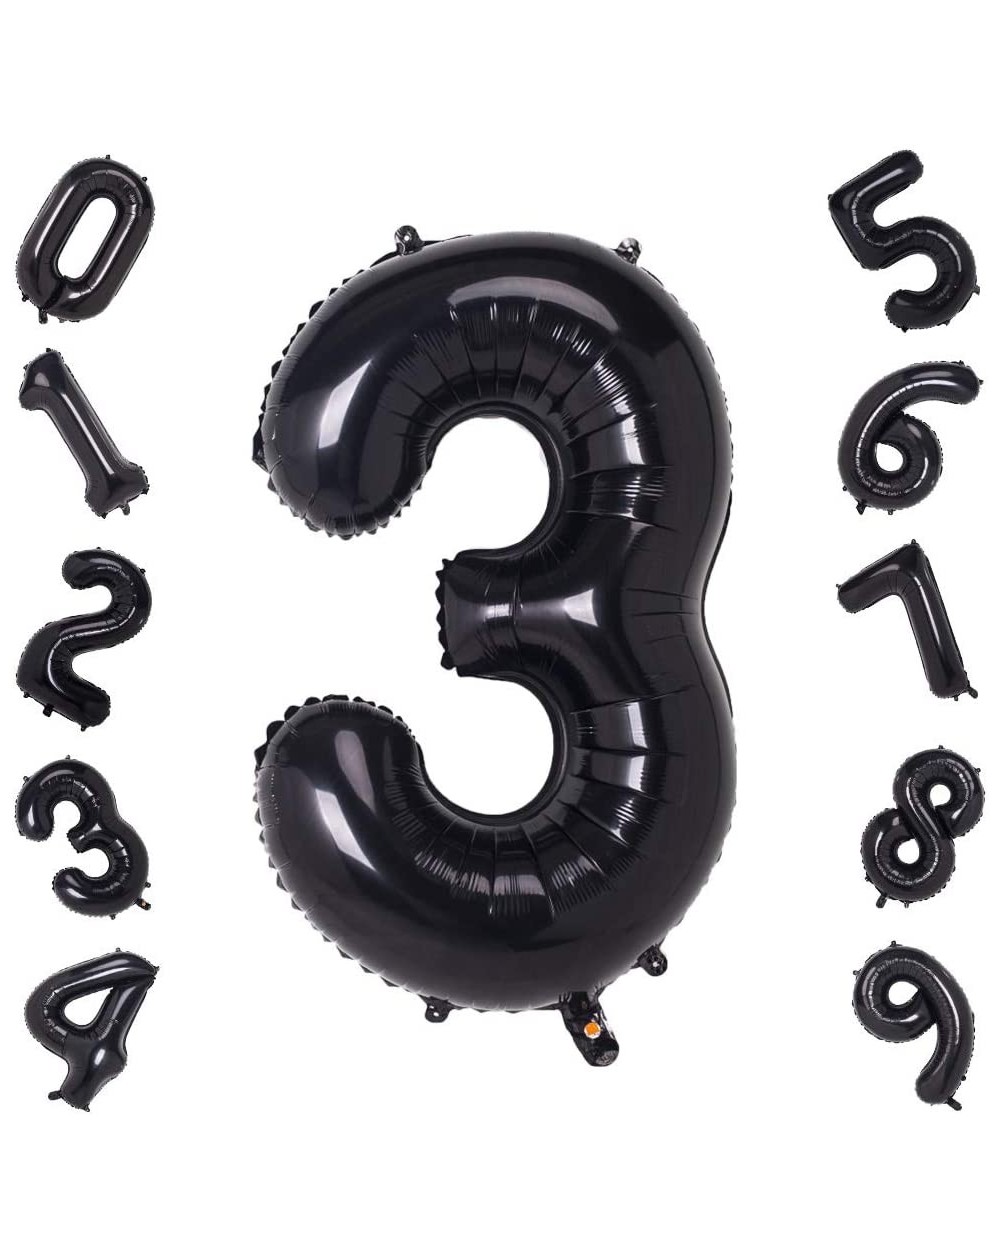 Balloons 40 Inch Giant Black Number 3 Balloon-Foil Helium Digital Balloons for Birthday Anniversary Party Festival Decoration...